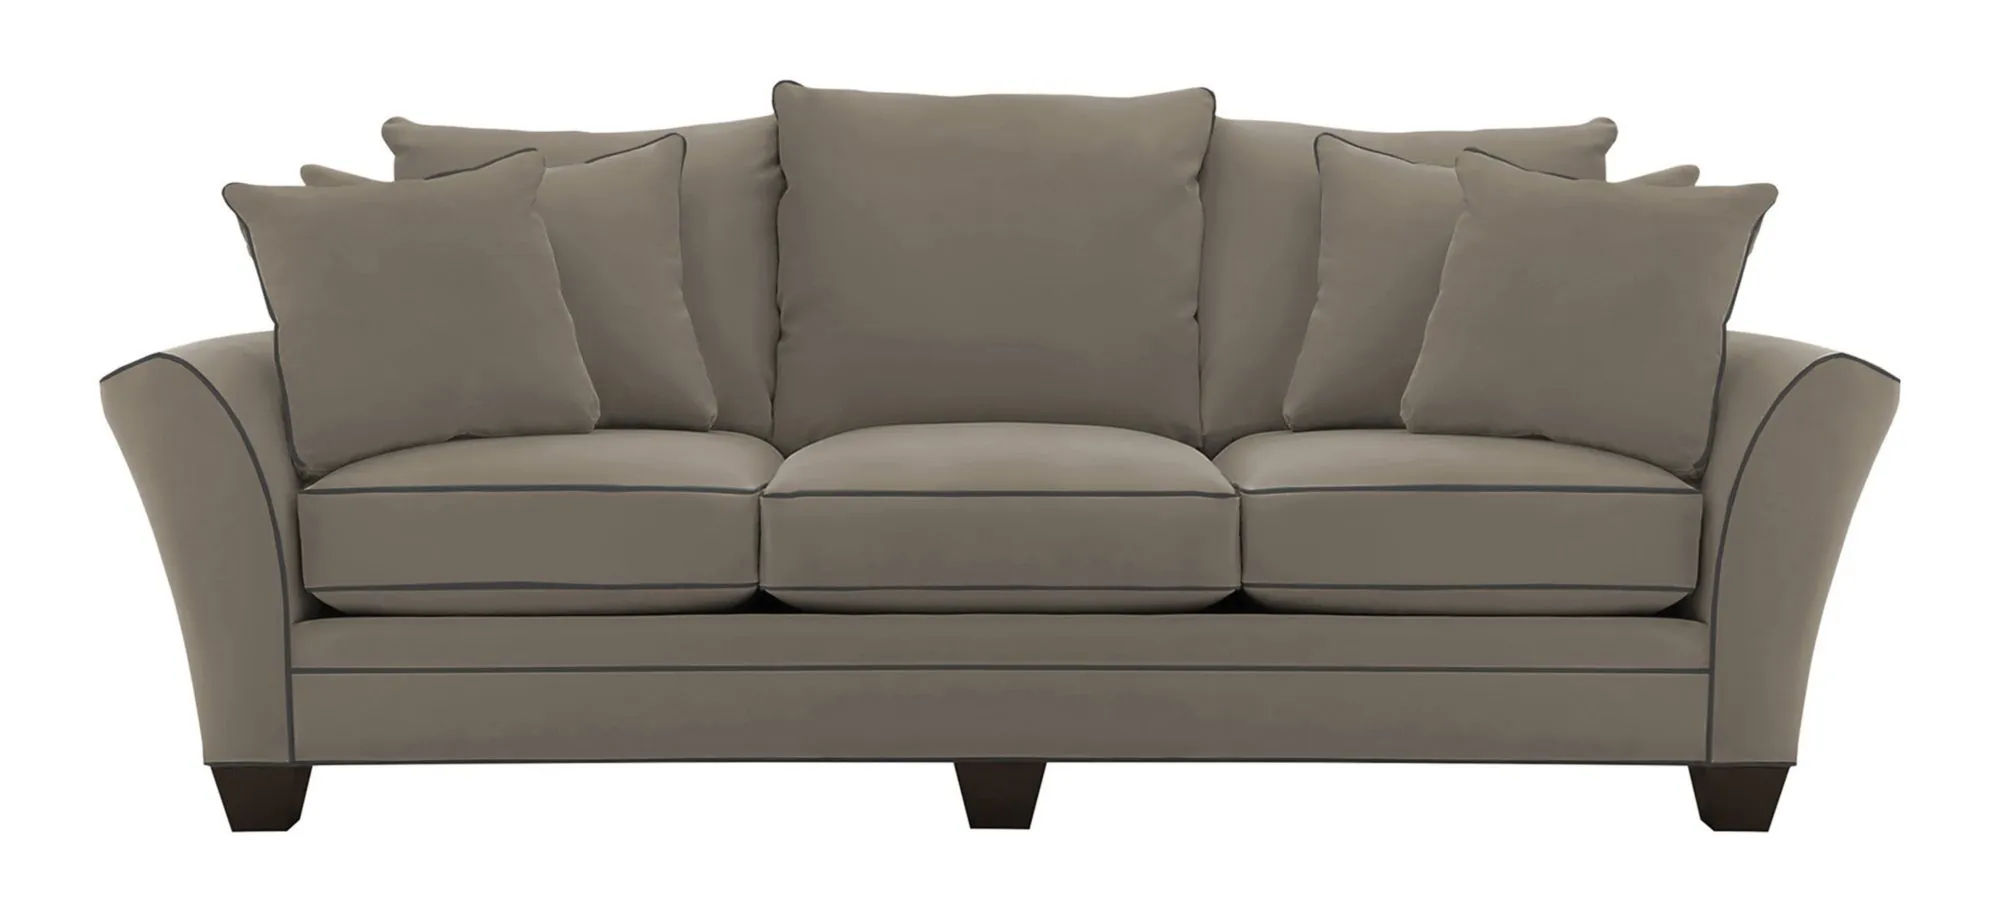 Briarwood Sofa in Suede So Soft Mineral/Slate by H.M. Richards